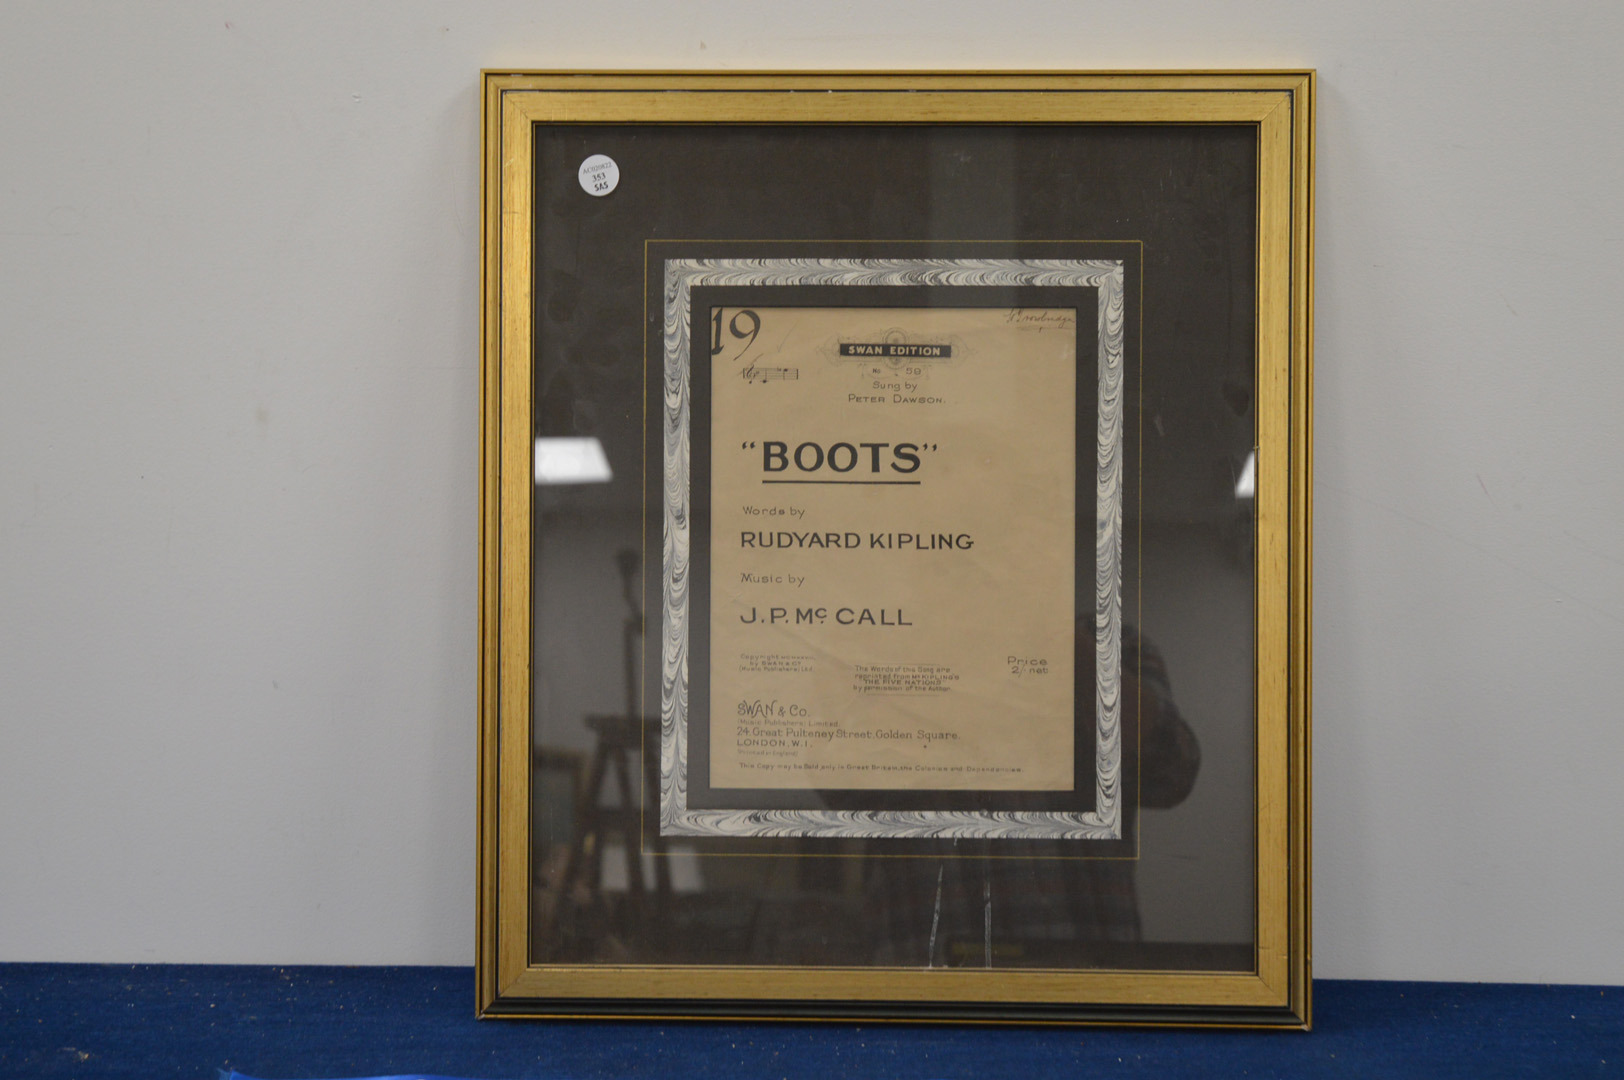 A framed cover of 'Boot's' by Rudyard Kipling, the music by J.P. Mcall, 60cm x 52cm IMPORTANT!